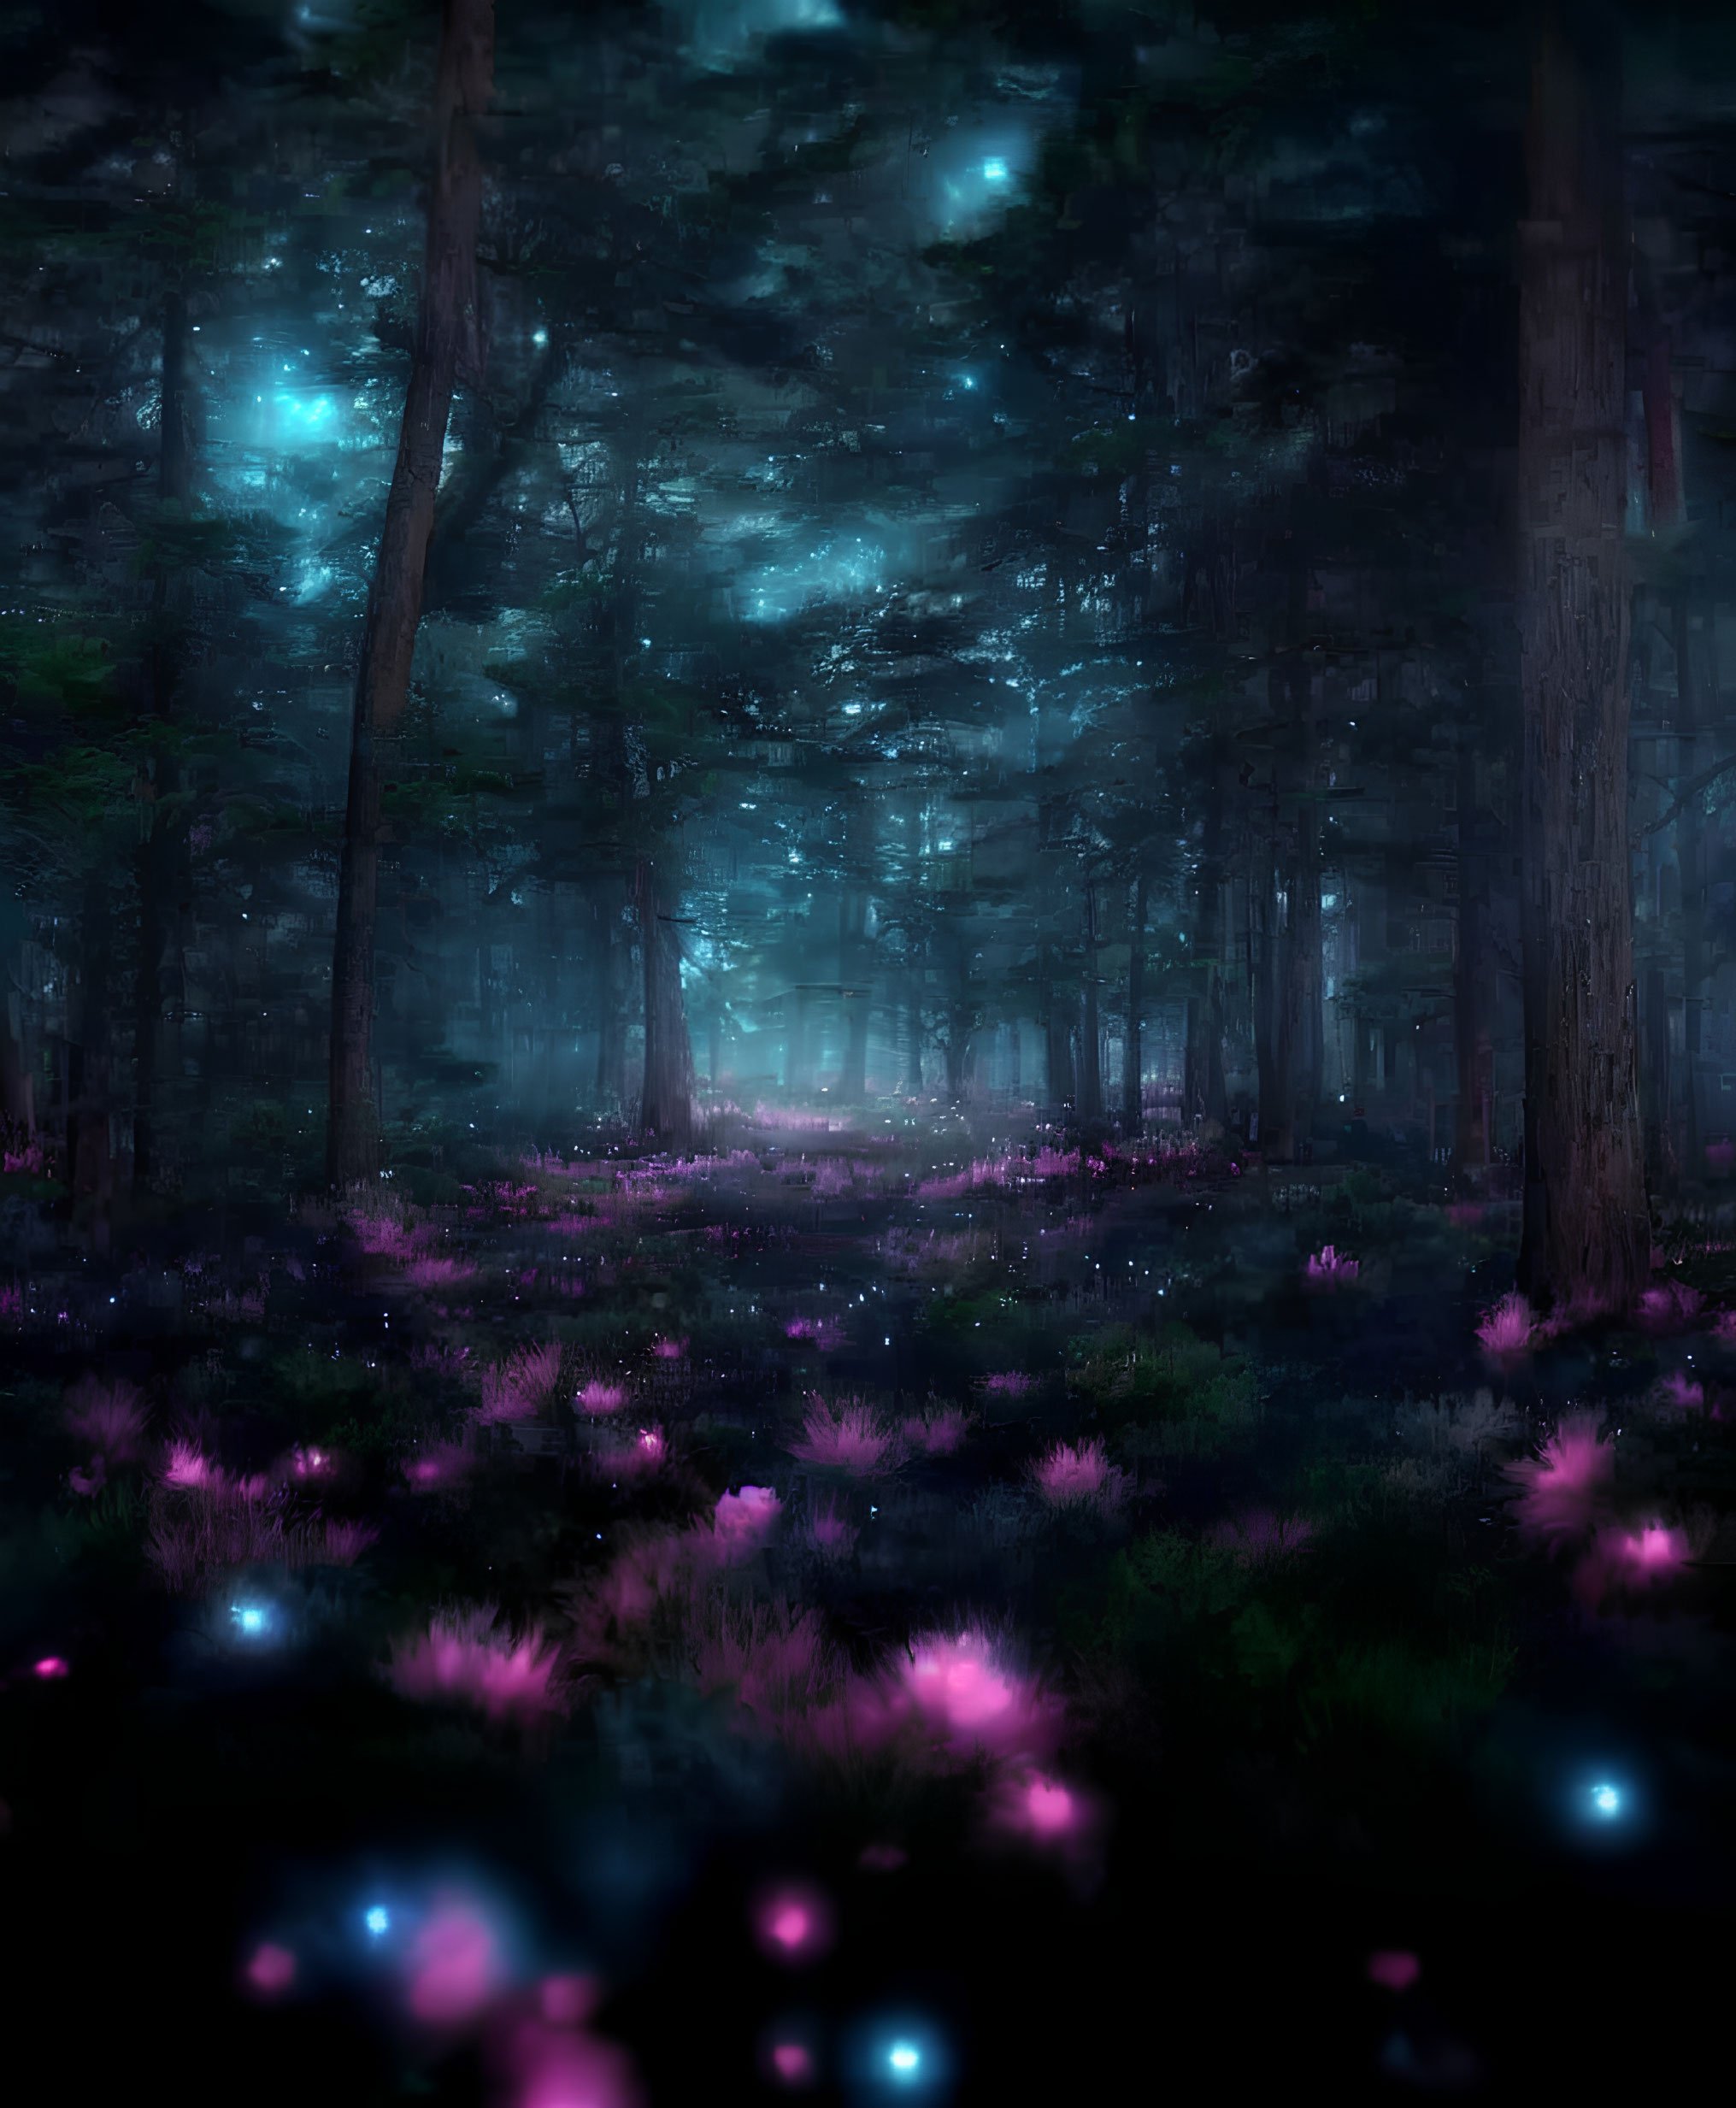 Enchanting night scene in mystical forest with glowing flowers